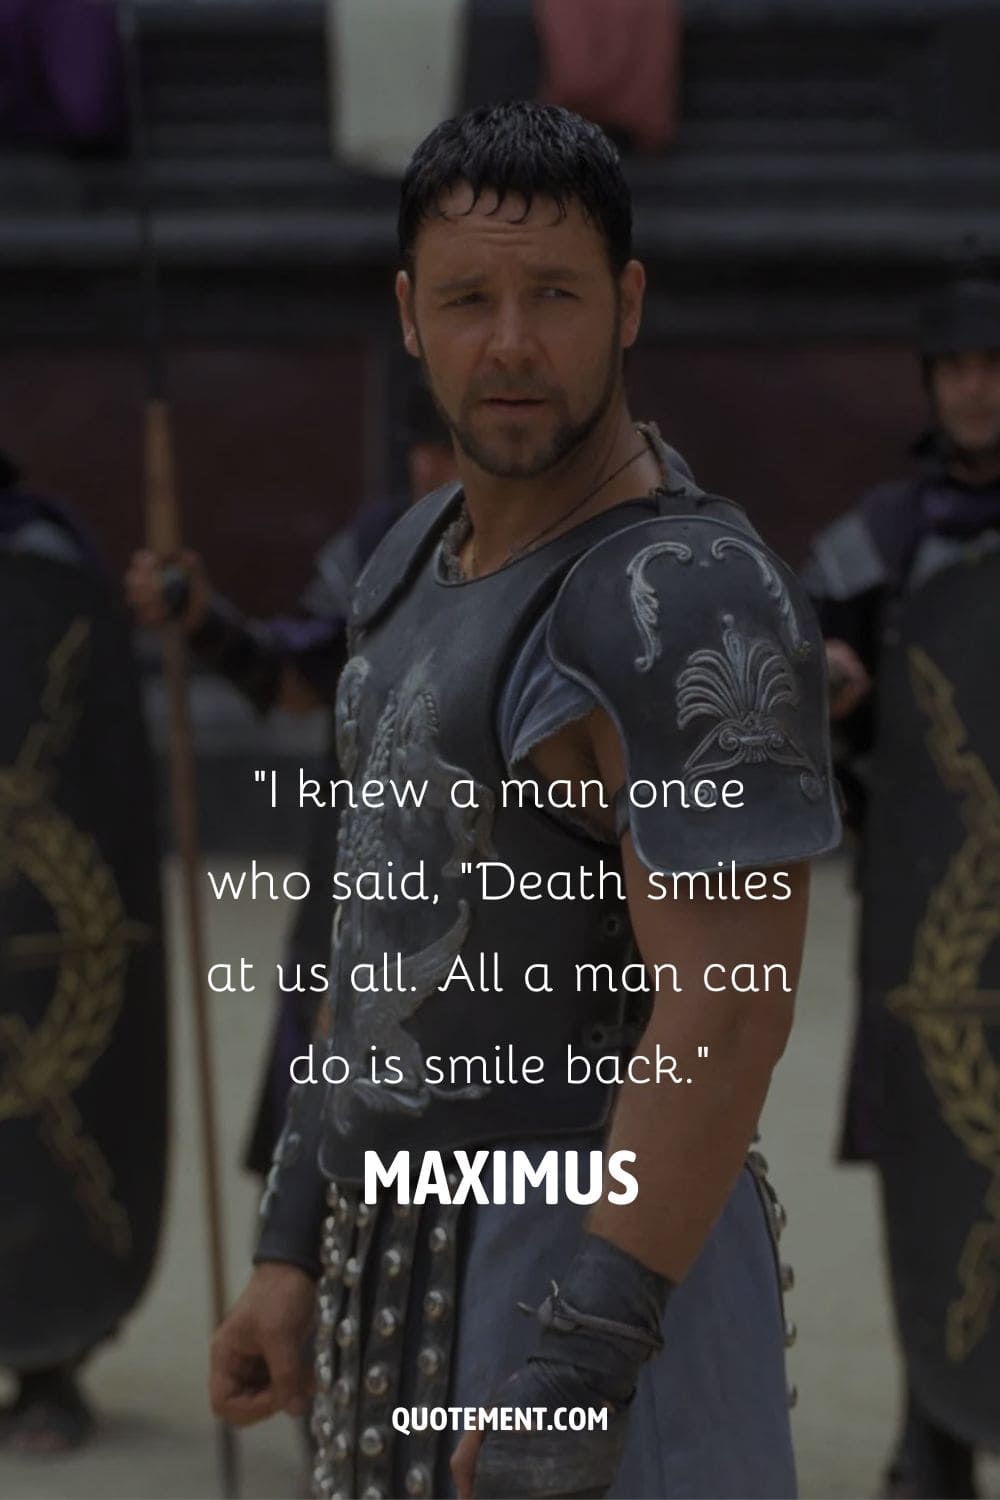 Image of gladiator Maximus representing the most famous gladiator quote.